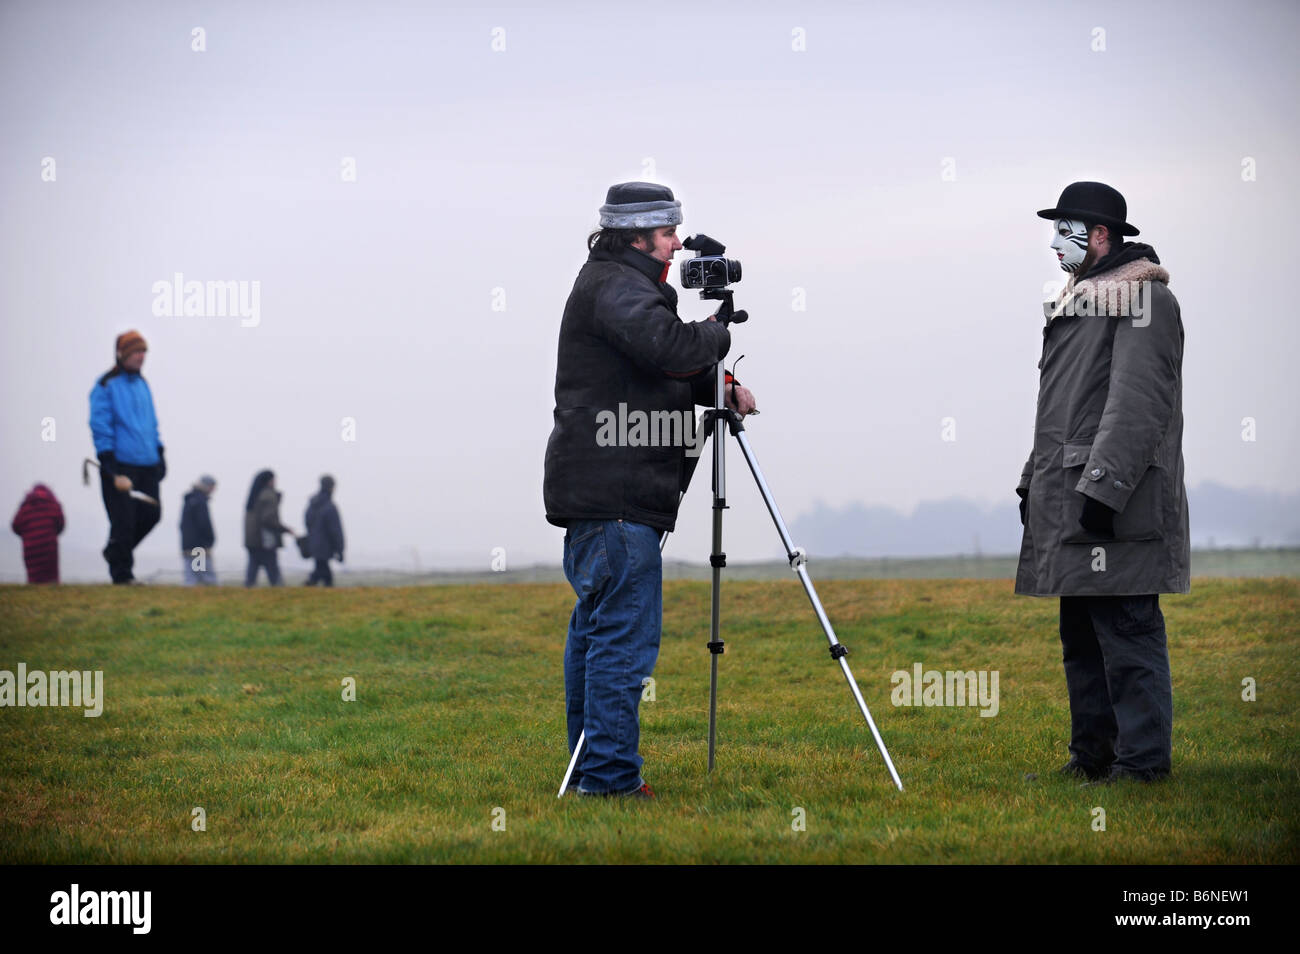 A VISITOR TO STONEHENGE WEARING A WHITEFACE CLOWN MASK IS PHOTOGRAPHED DURING THE CELEBRATIONS OF THE WINTER SOLSTICE WILTSHIRE Stock Photo